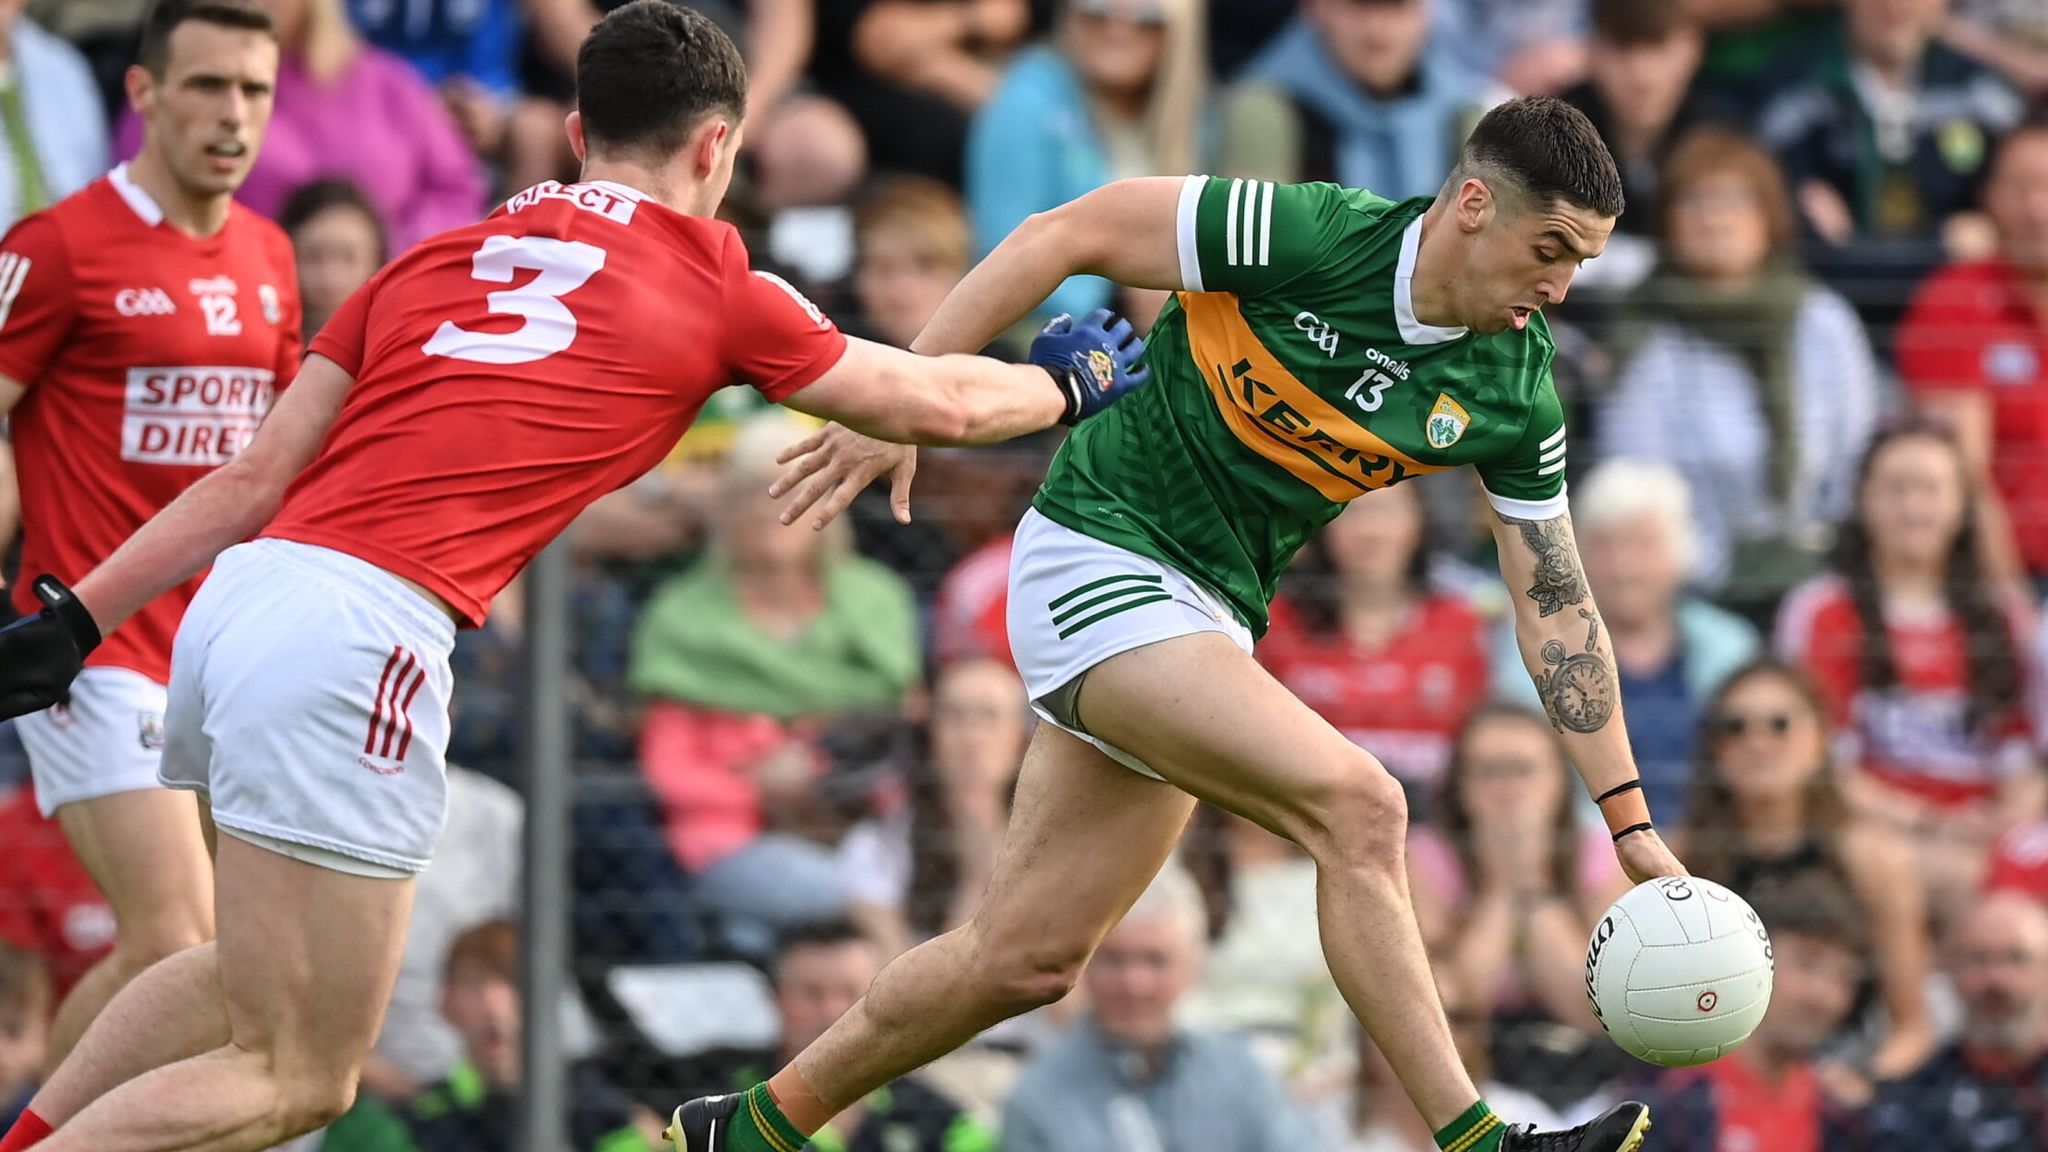 Start times changed for some Round 3 Championship fixtures - Cork GAA